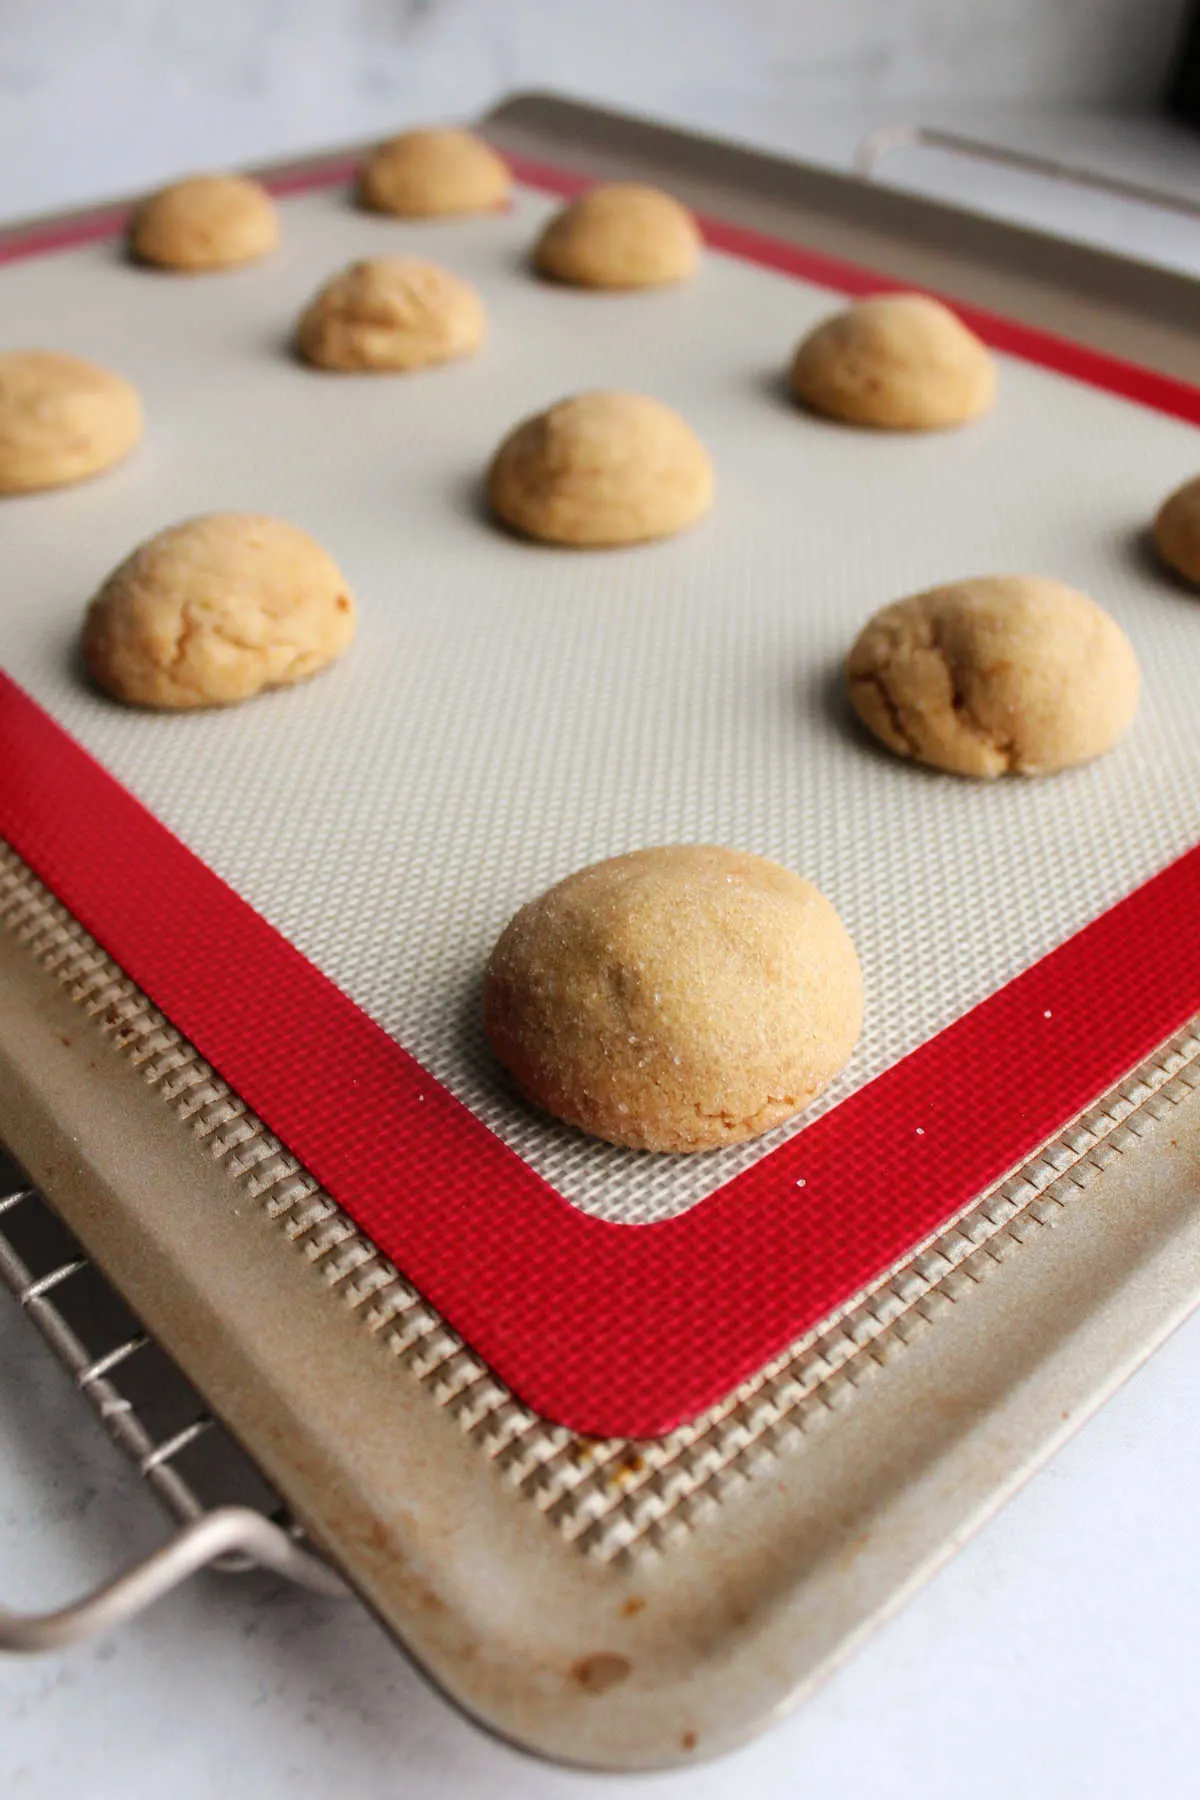 warm peanut butter cookies on baking tray, fresh from the oven and waiting for their chocolate kisses.